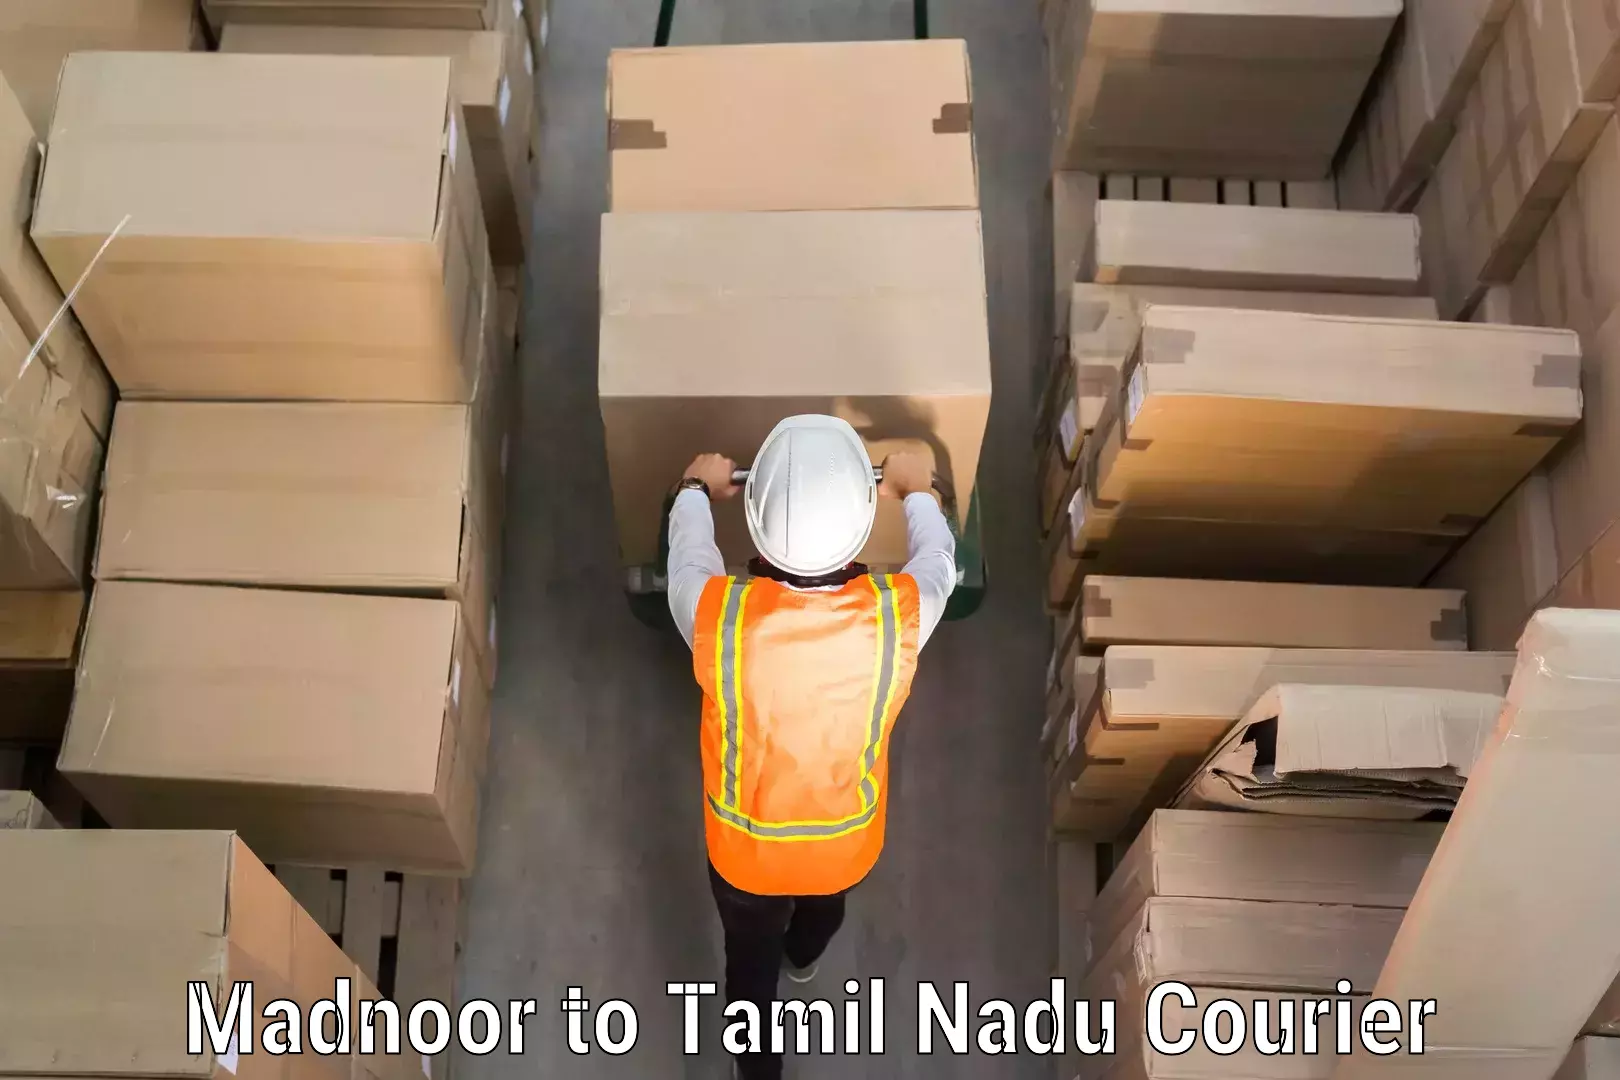 Luggage shipping planner in Madnoor to Chennai Port